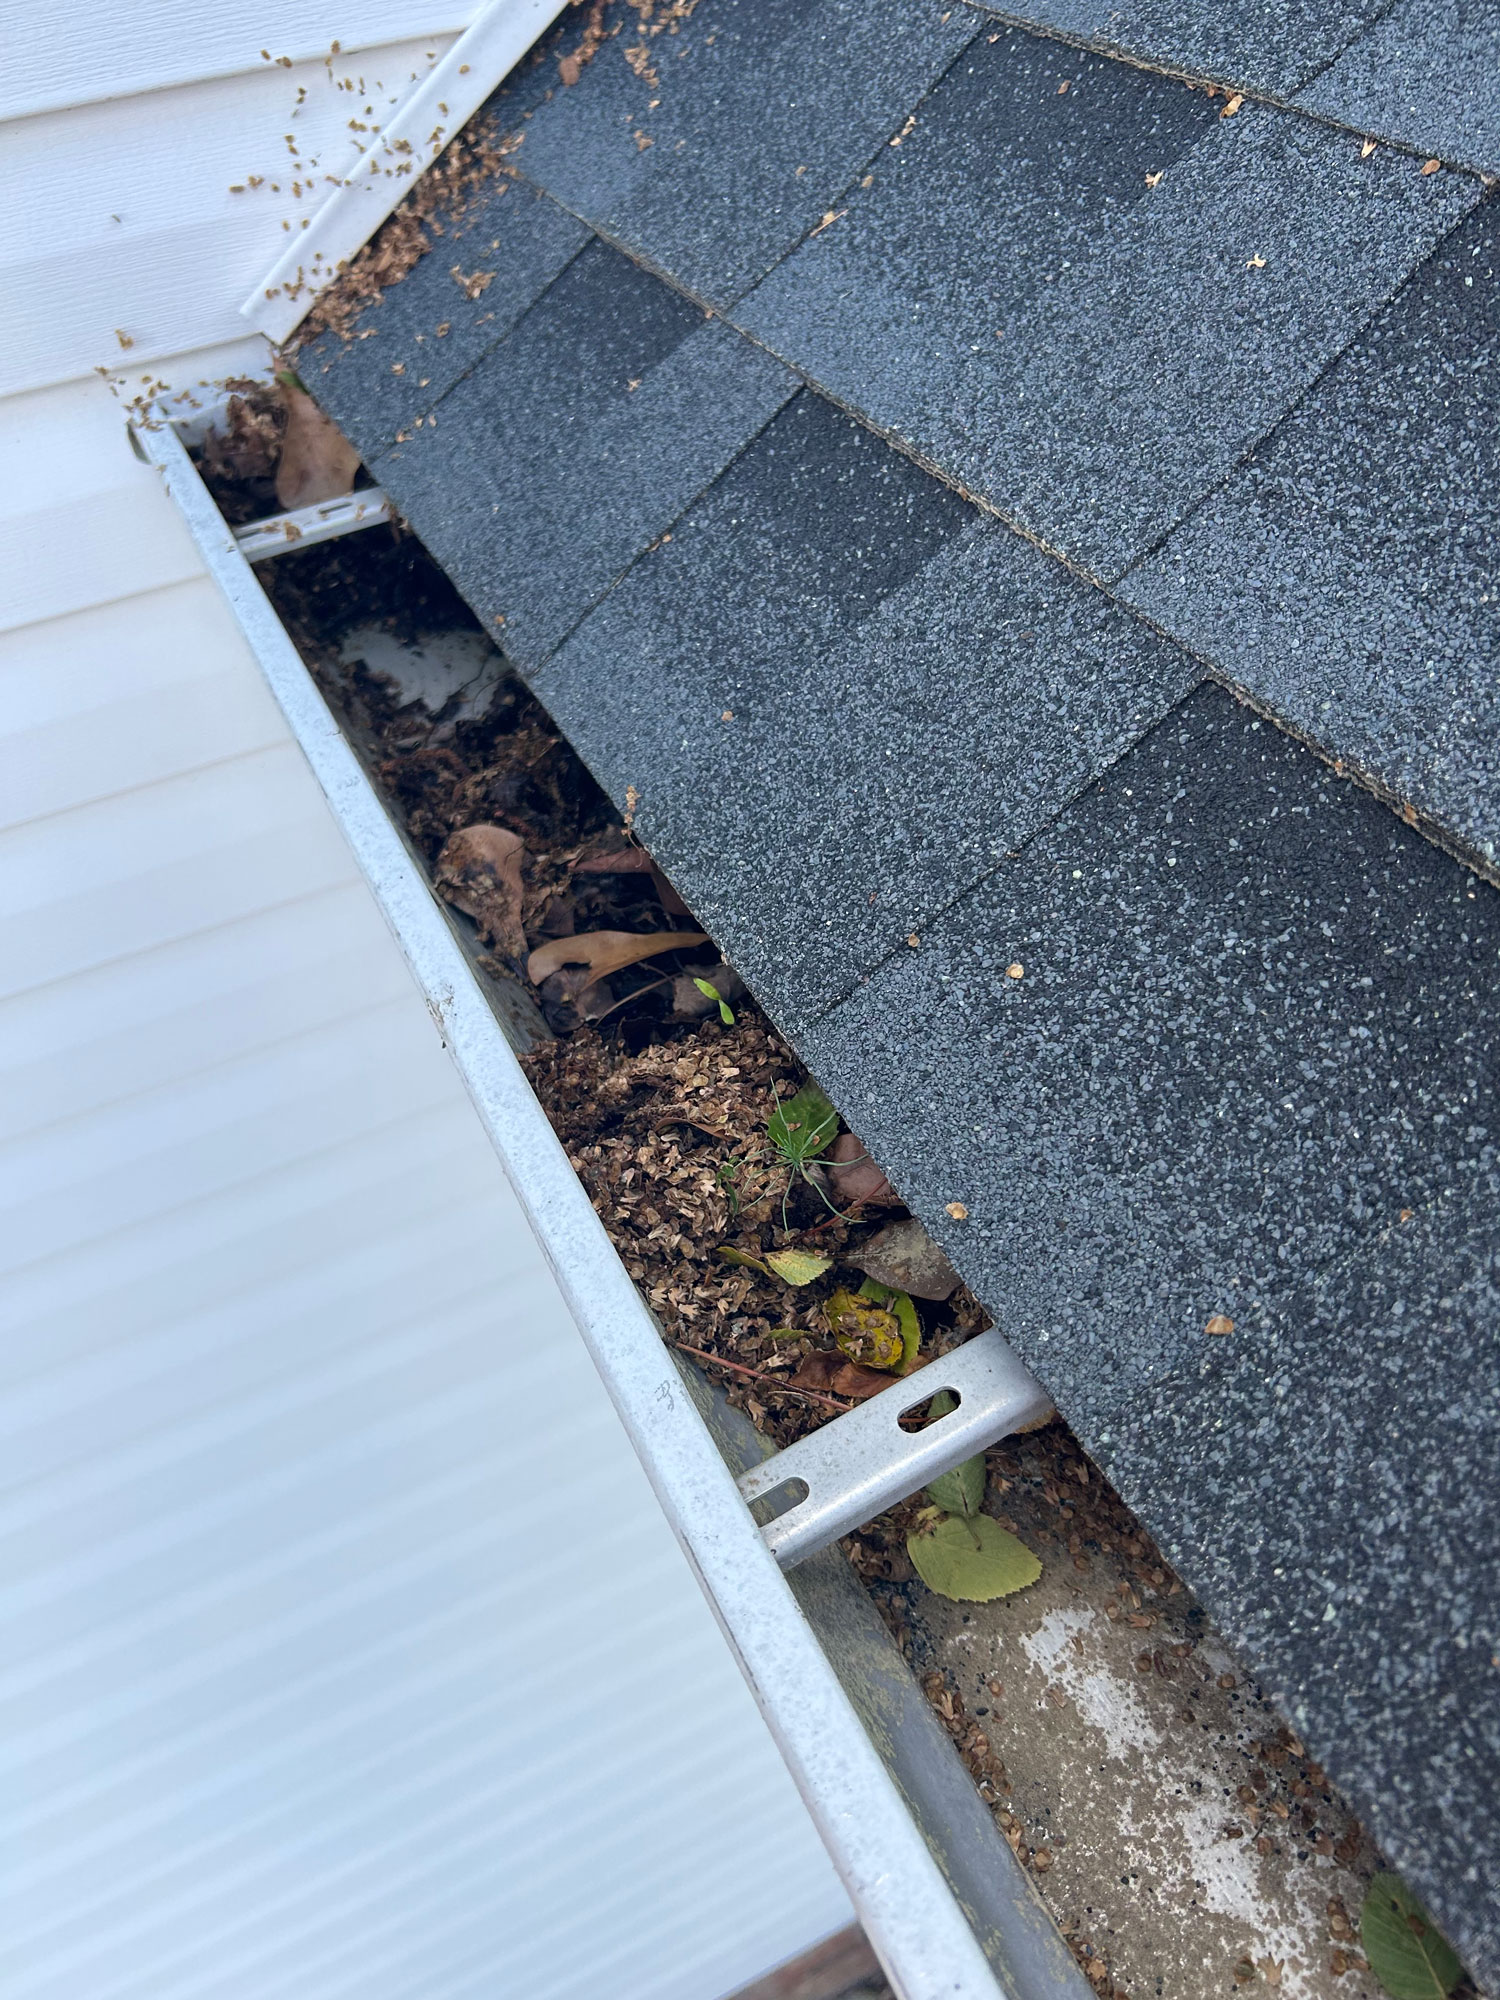 Gutter before cleaning